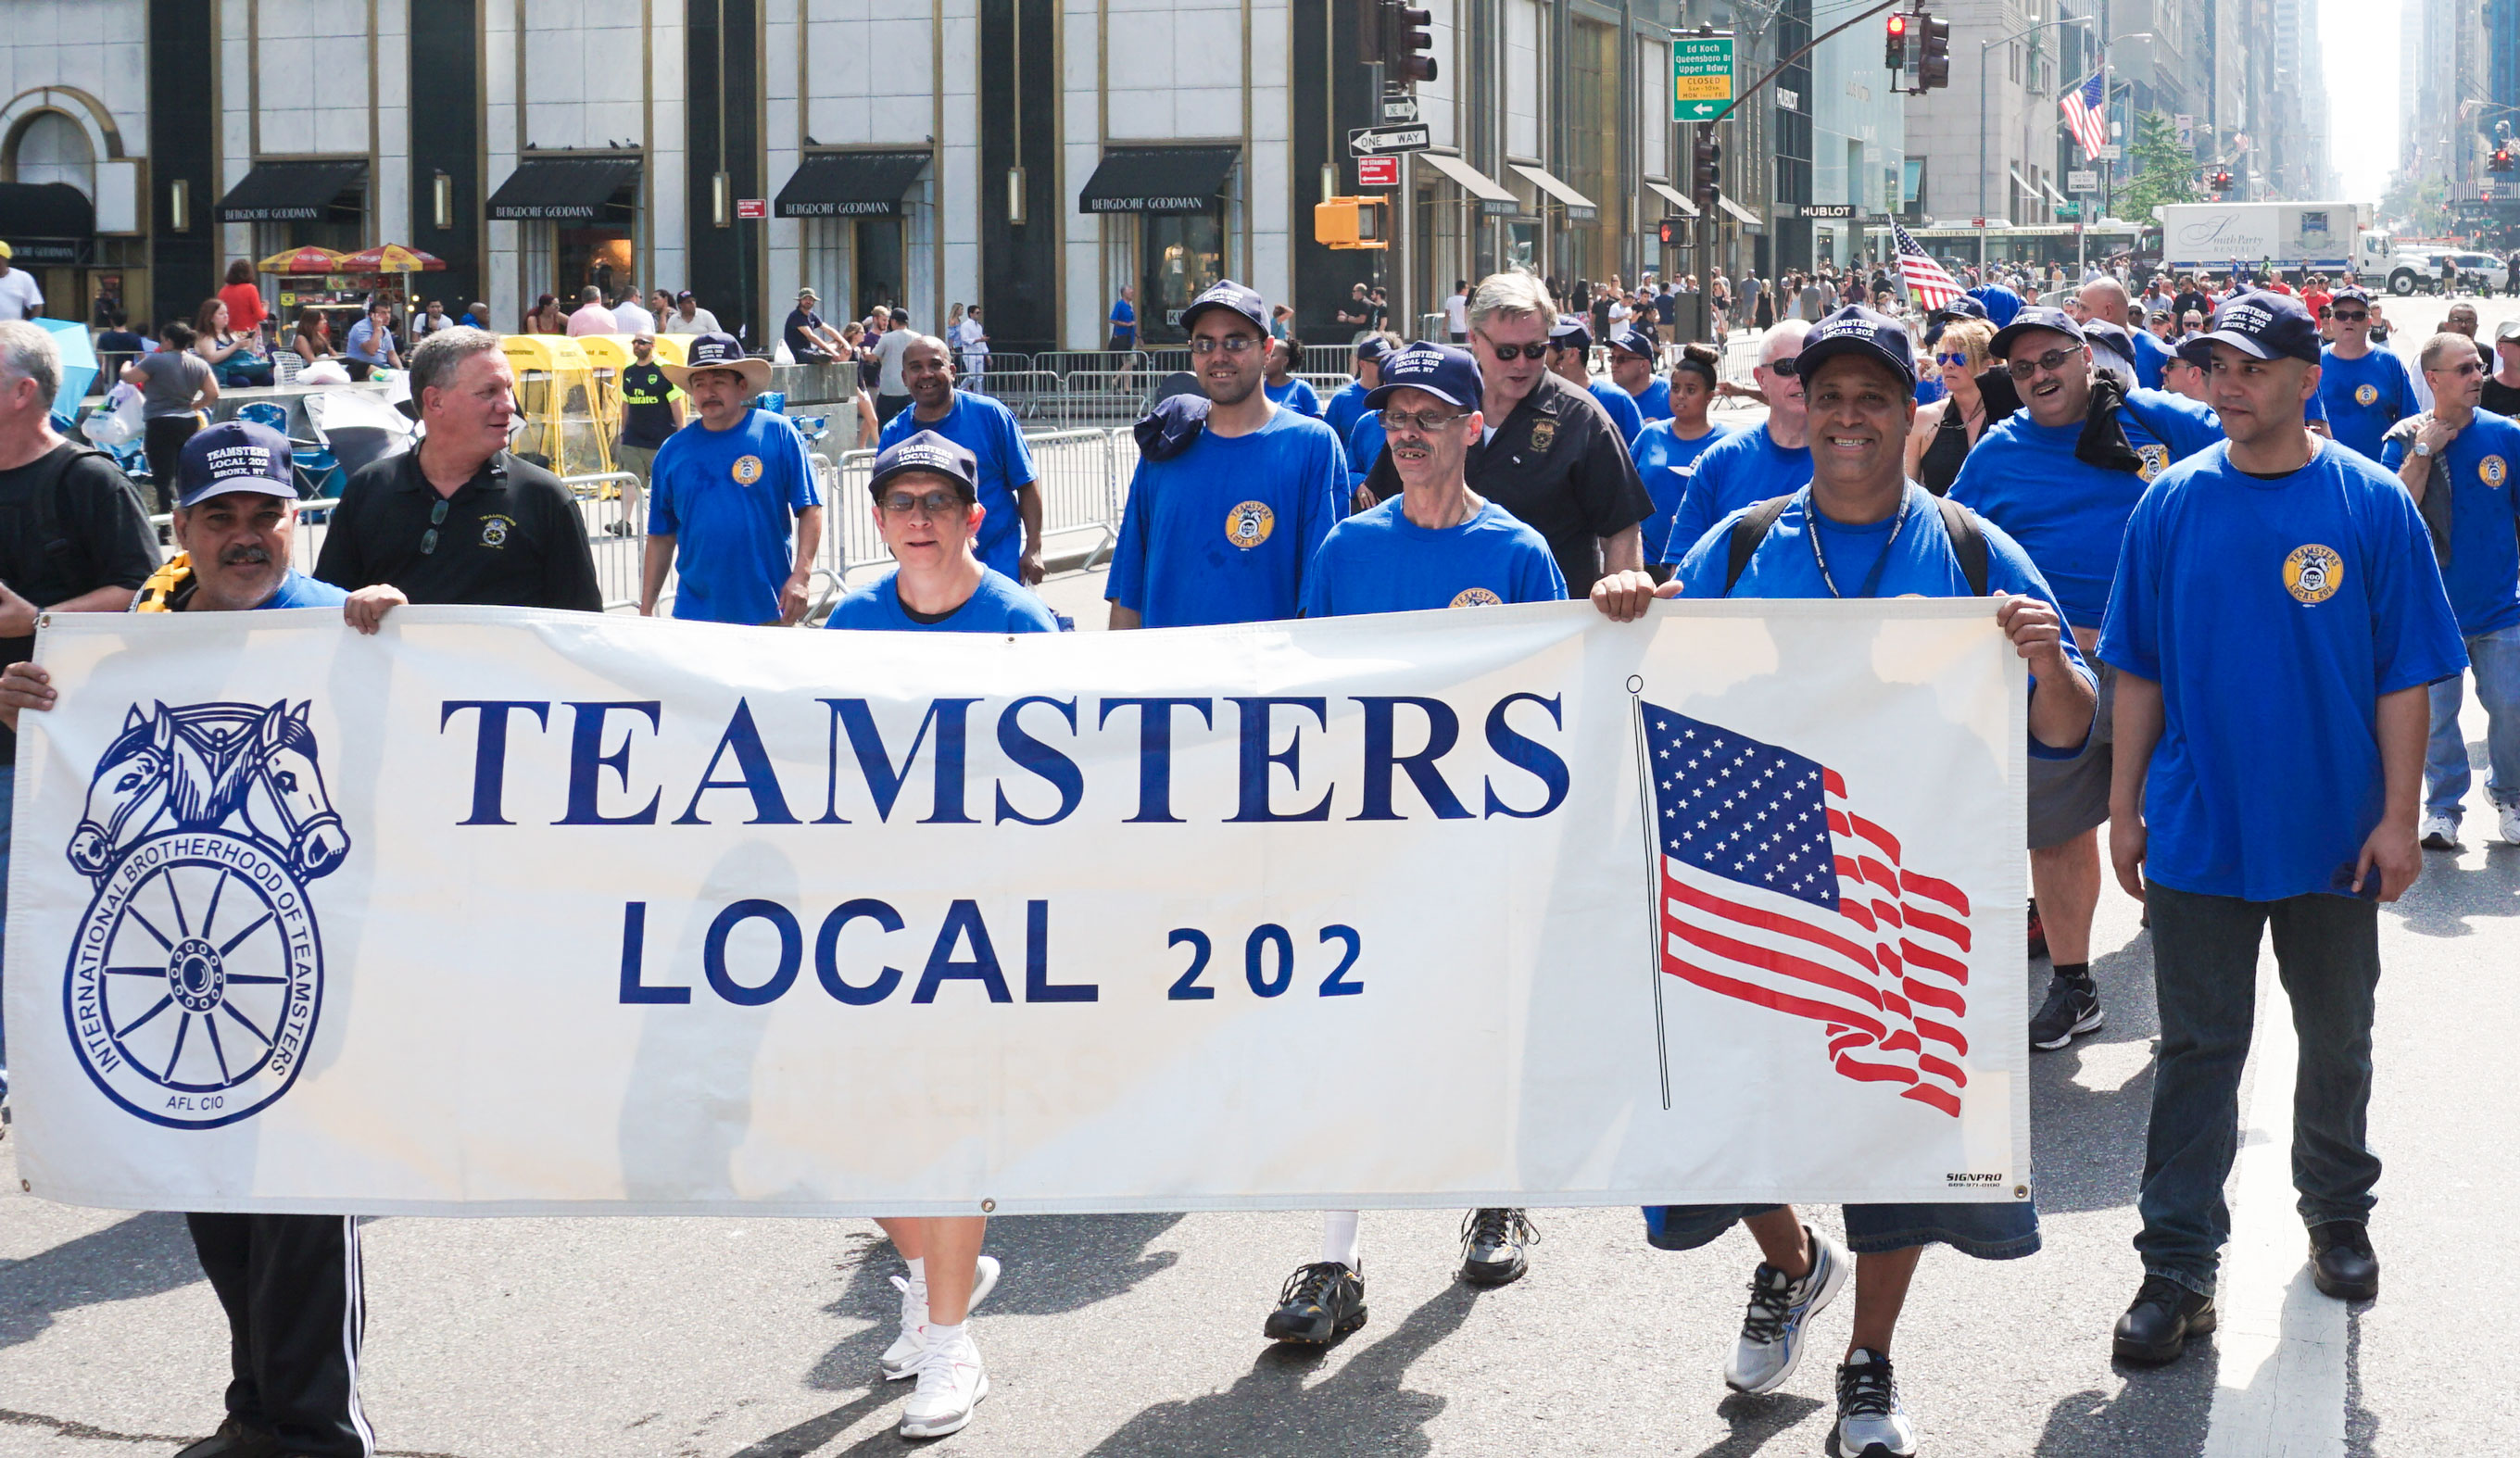 Teamsters Local 202